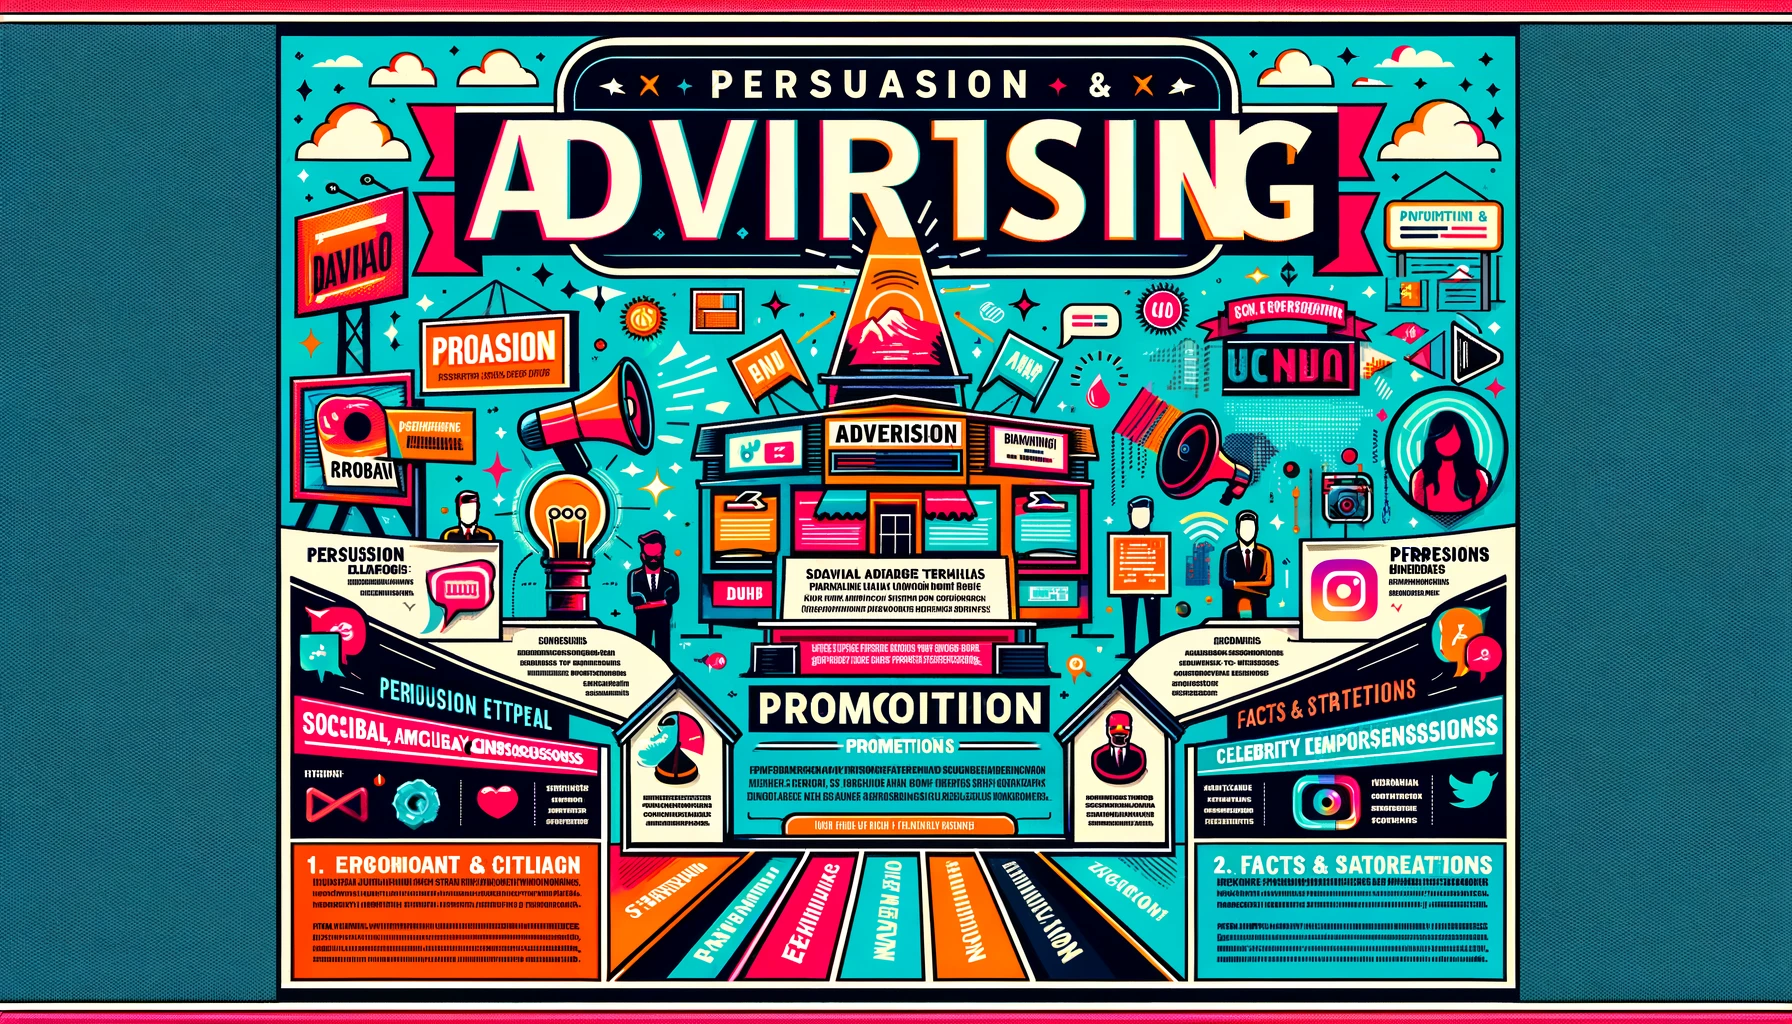 Advertising,It's All About Persuasion And Promotion